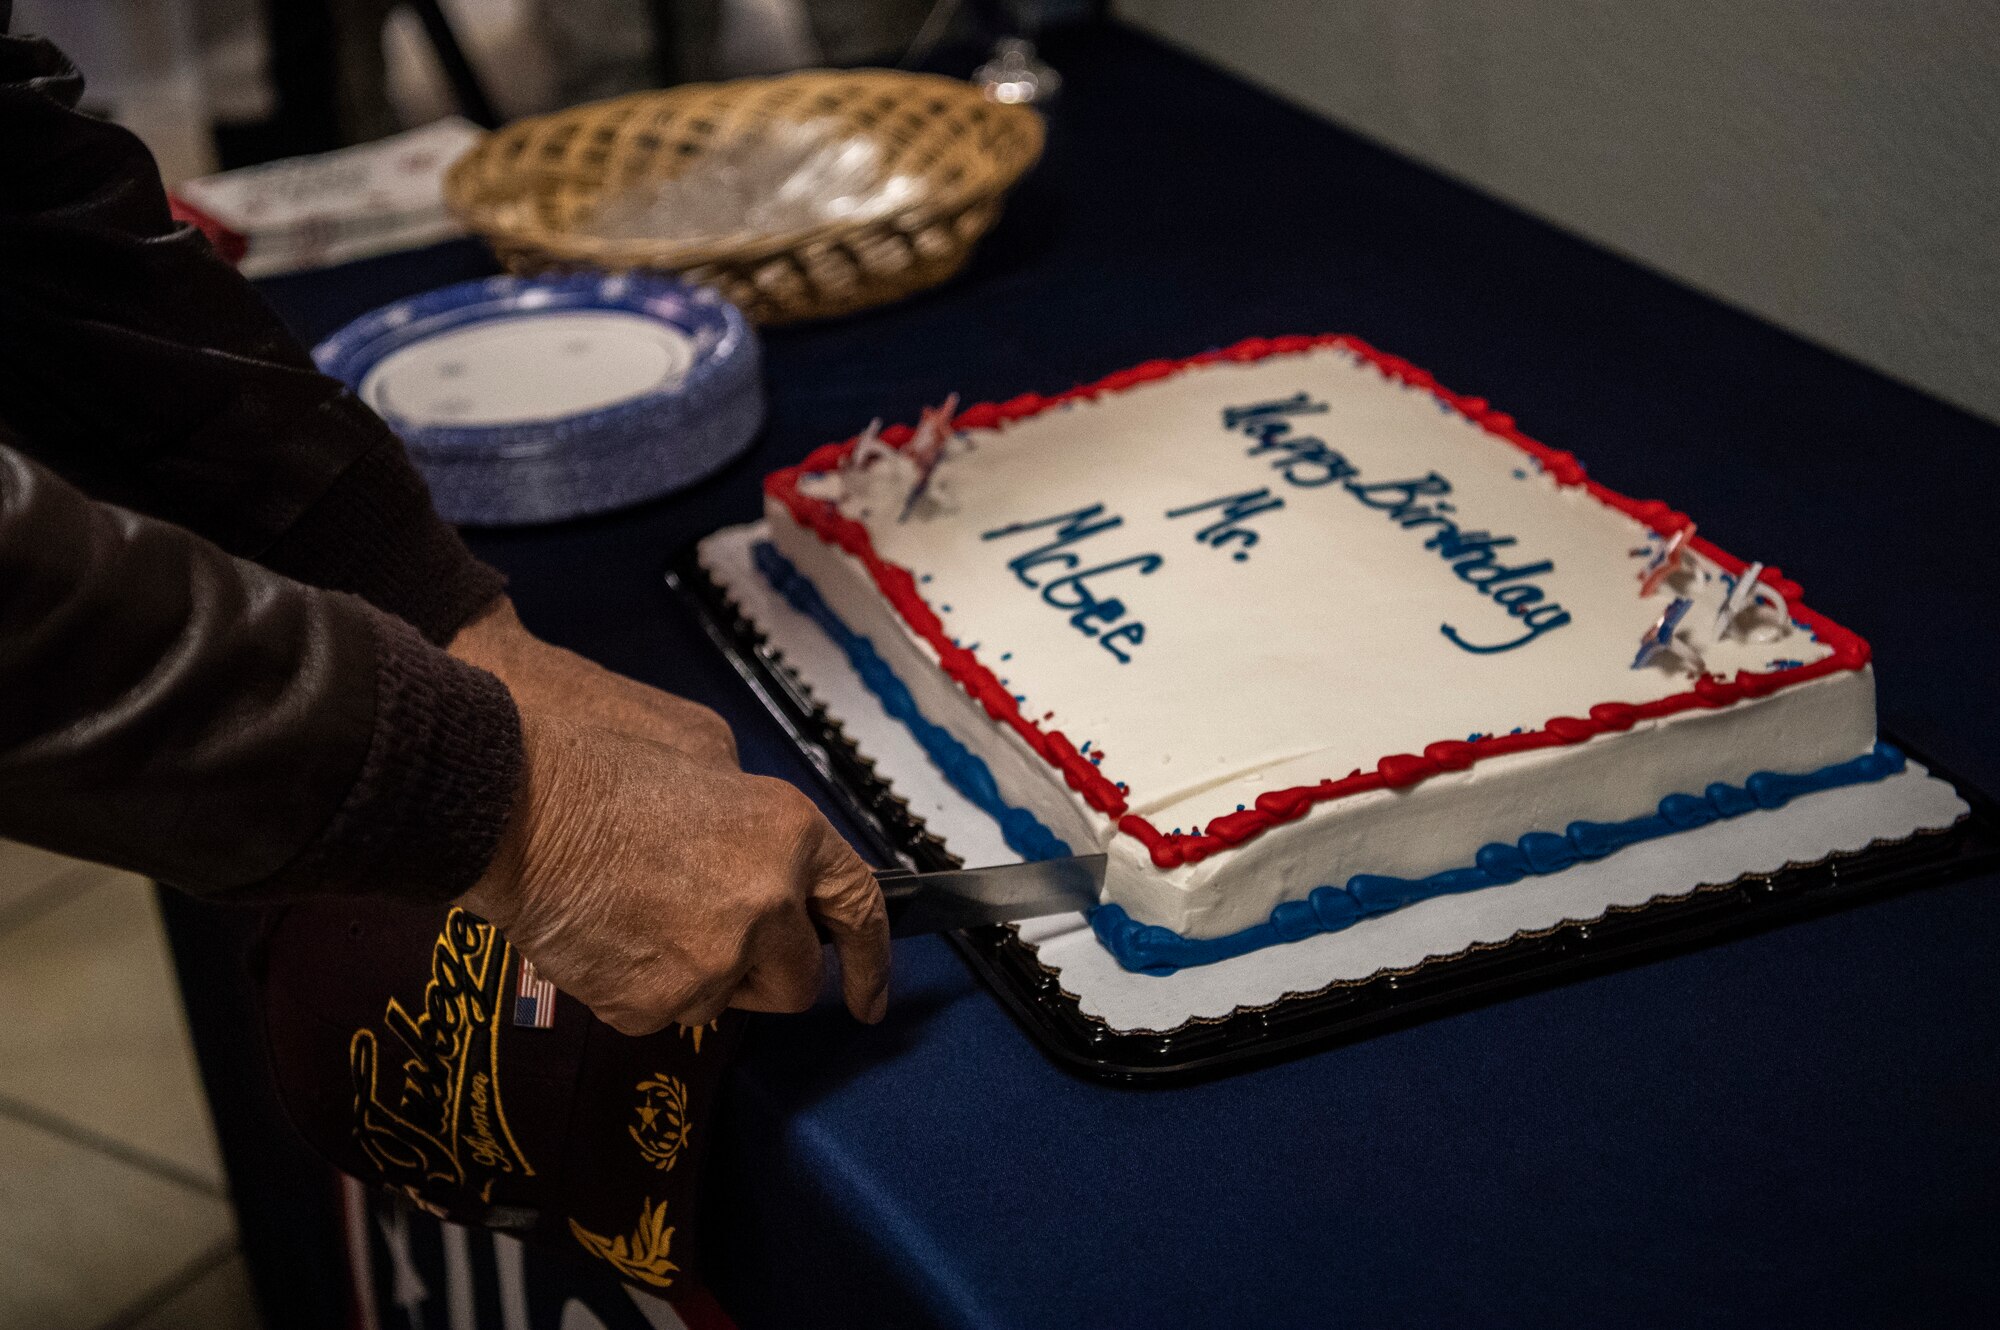 Former Tuskegee Airman, retired Col. Charles McGee, cuts the cake for his 100th birthday Dec. 6, 2019, at Dover Air Force Base, Del. McGee was born in Cleveland, Ohio, Dec. 7, 1919. He served a total of 30 years in the U.S. Air Force, beginning with the U.S. Army Air Corps, and flew a total of 409 combat missions in World War II, Korea and Vietnam. The Tuskegee program began in 1941 when the 99th Pursuit Squadron was established, and its Airmen were the first ever African-American military aviators in the U.S. Army Air Corps. (U.S. Air Force photo by Senior Airman Christopher Quail)